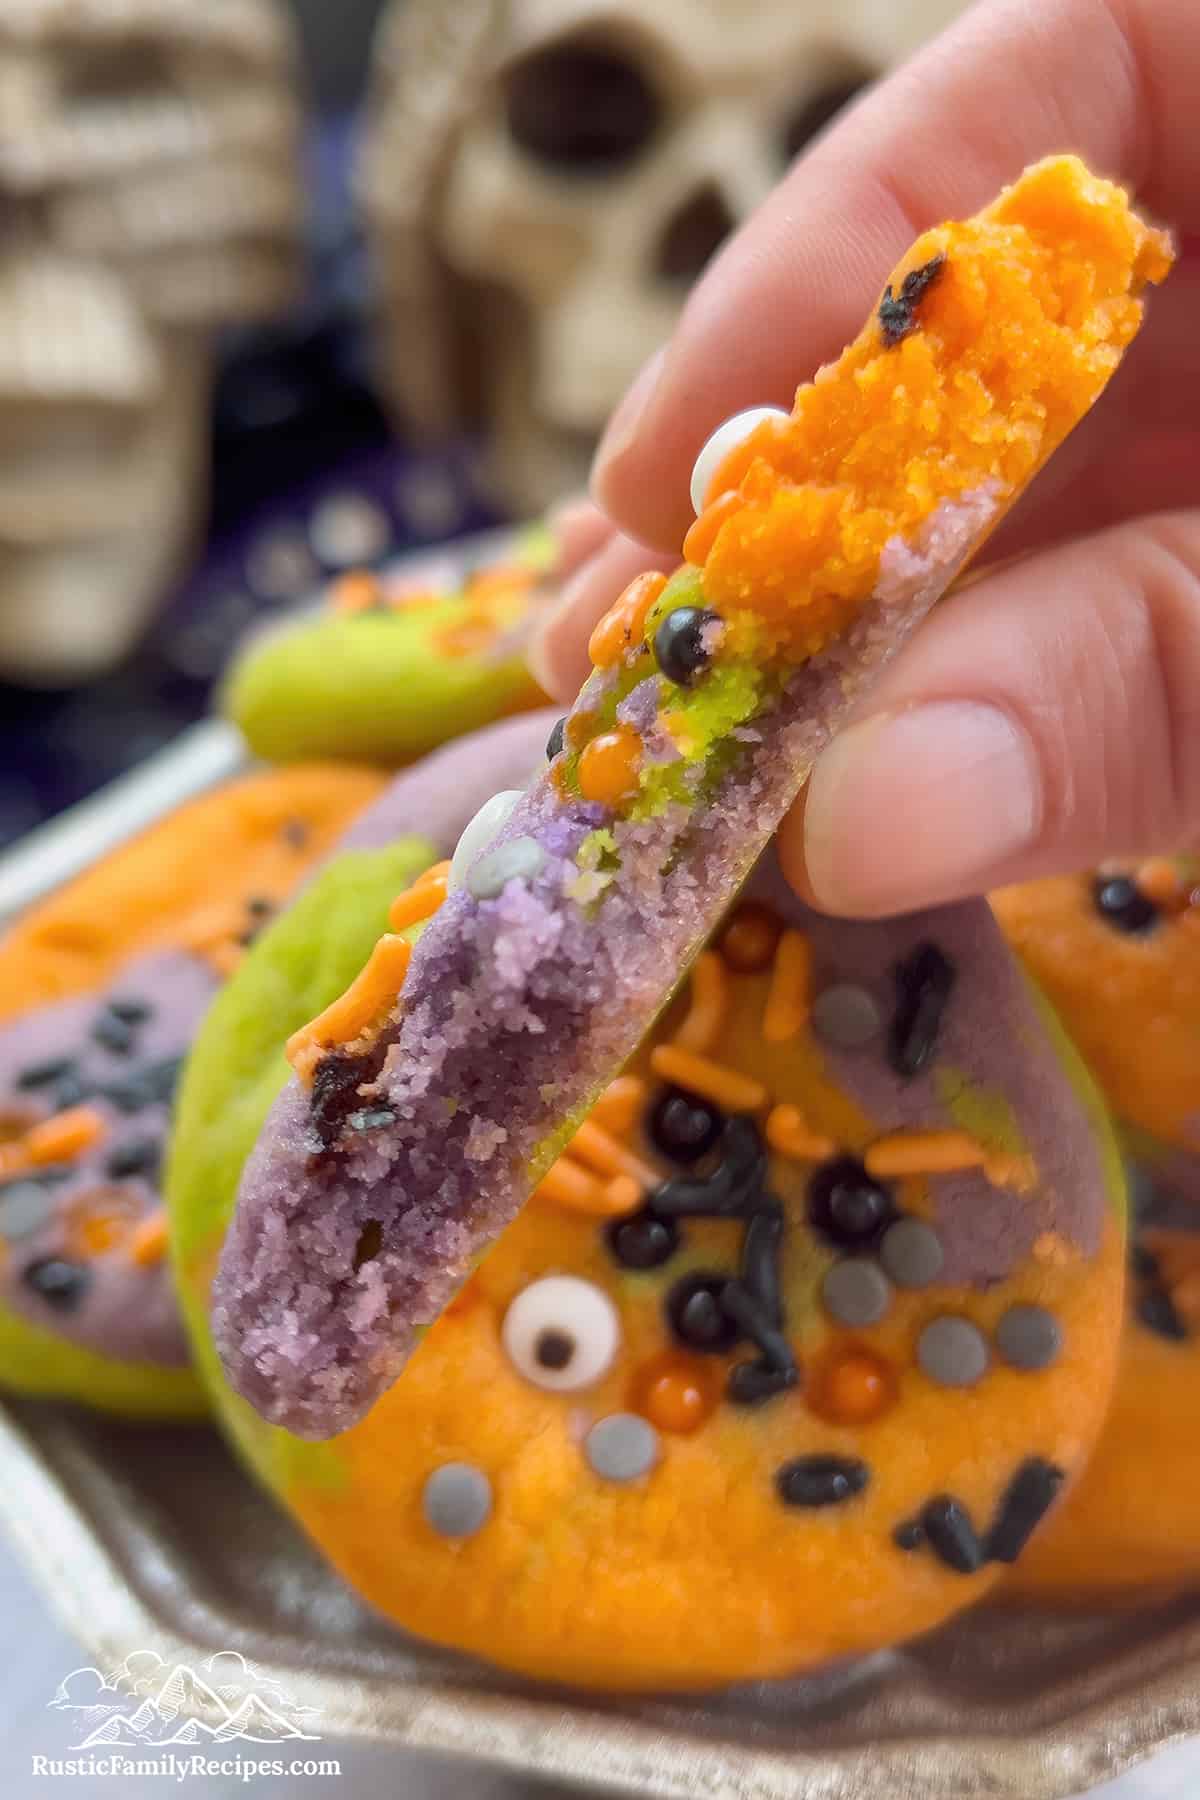 Close up of a hand holding a Hocus Pocus cookie with a bite taken out.